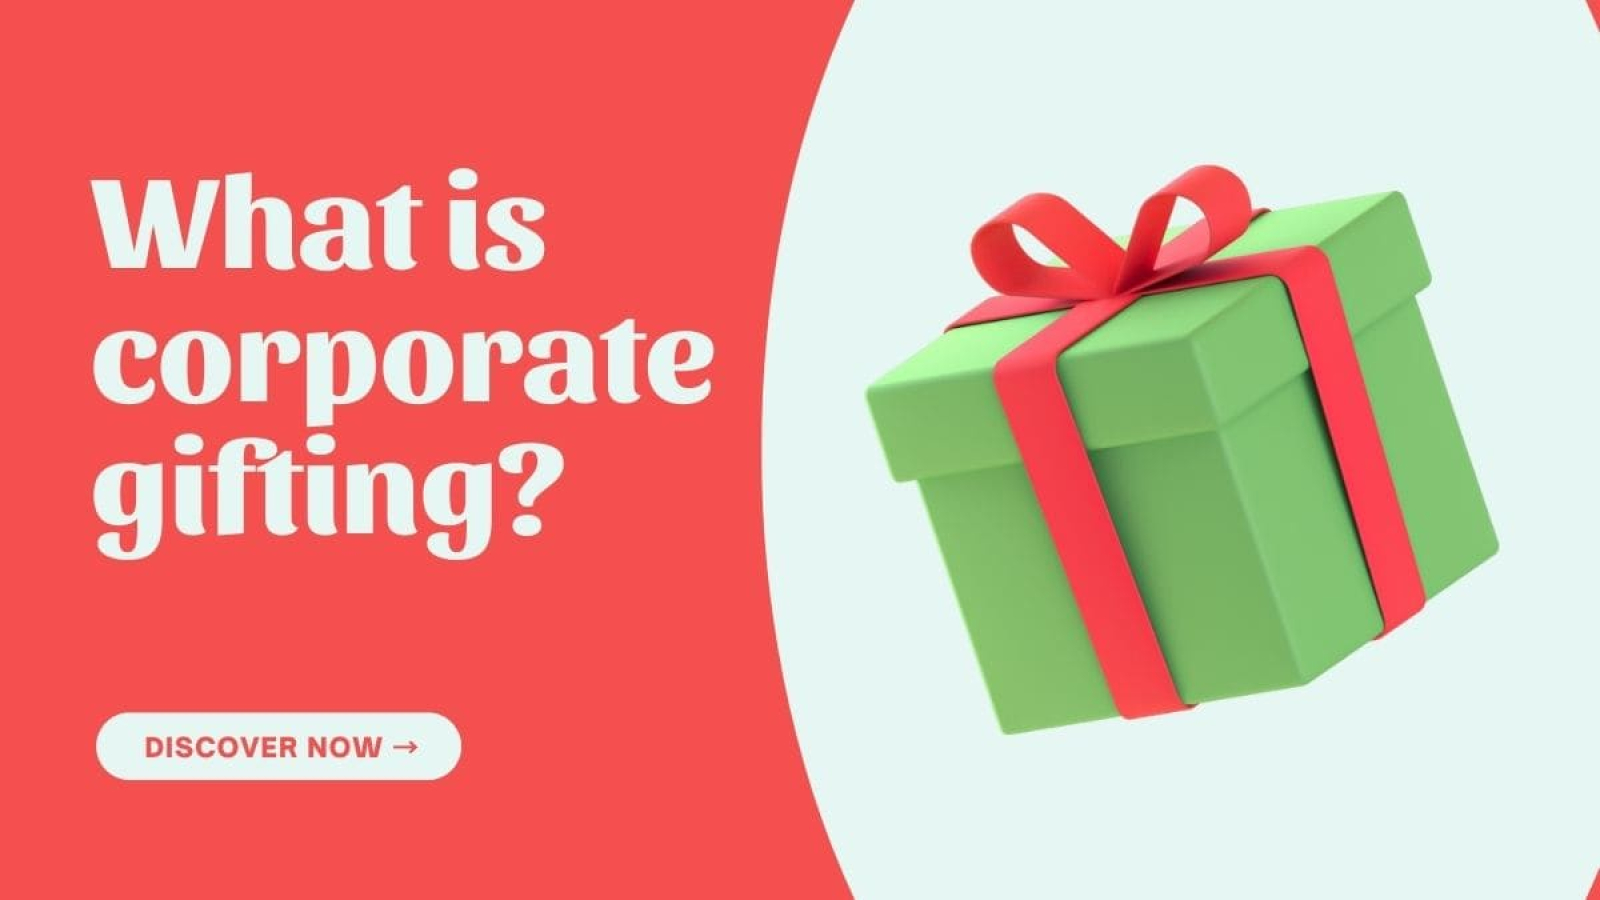 What is corporate gifting?